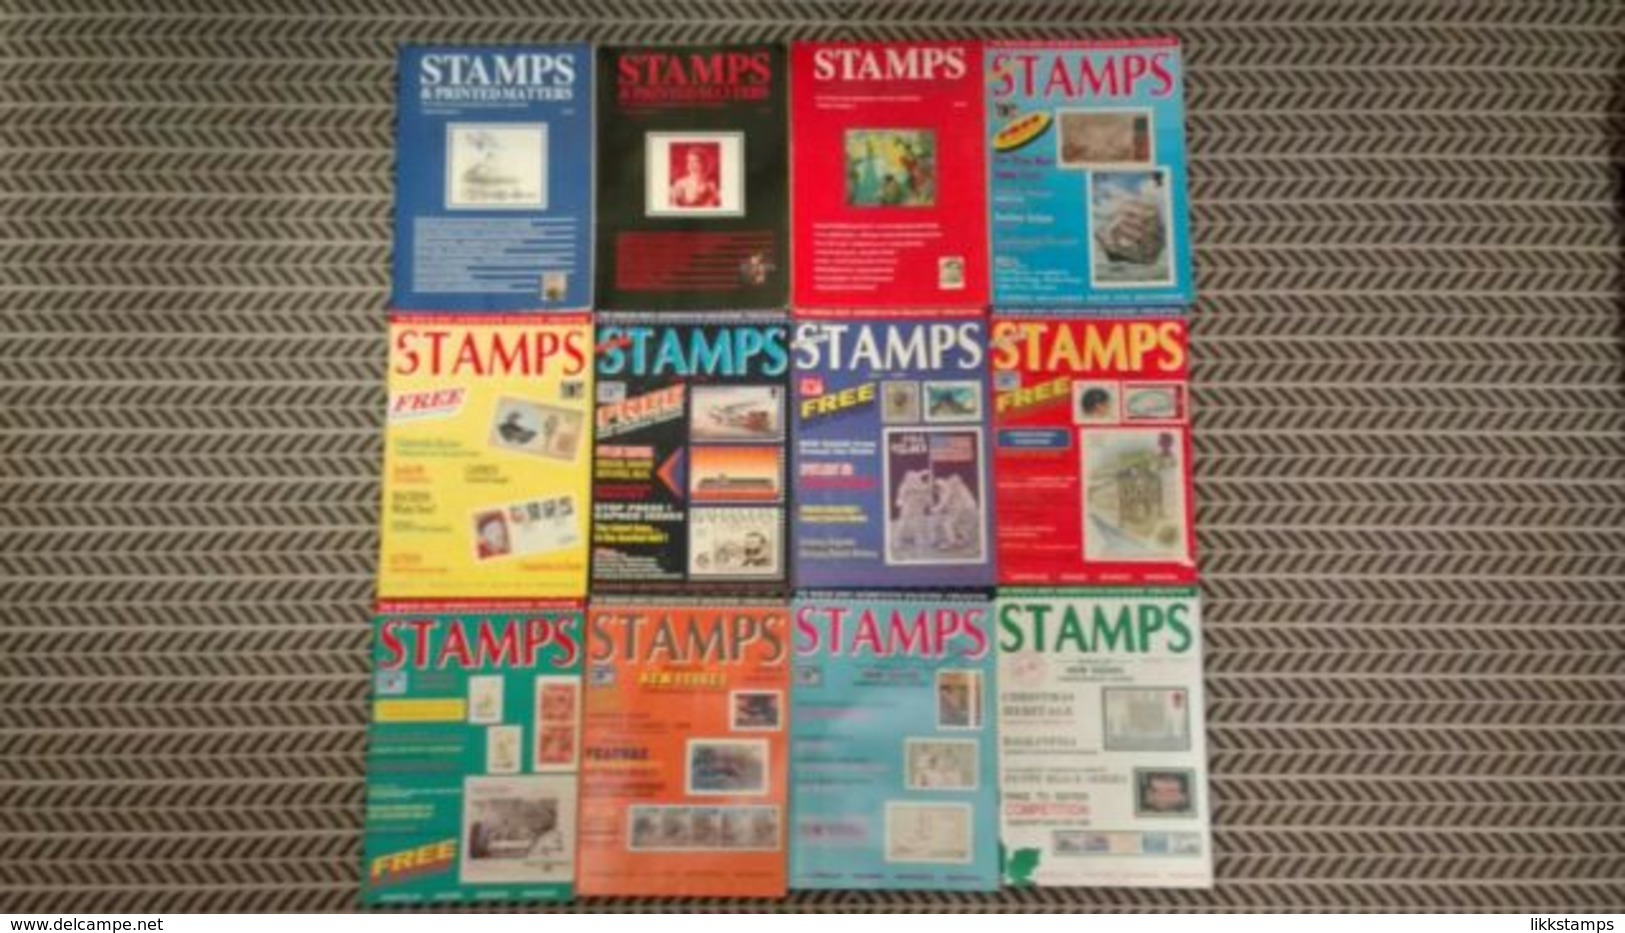 STAMPS AND PRINTED MATTER/STAMPS MAGAZINES JANUARY 1989 TO DECEMBER 1989  VOLUME 9 #L0011 - Anglais (àpd. 1941)